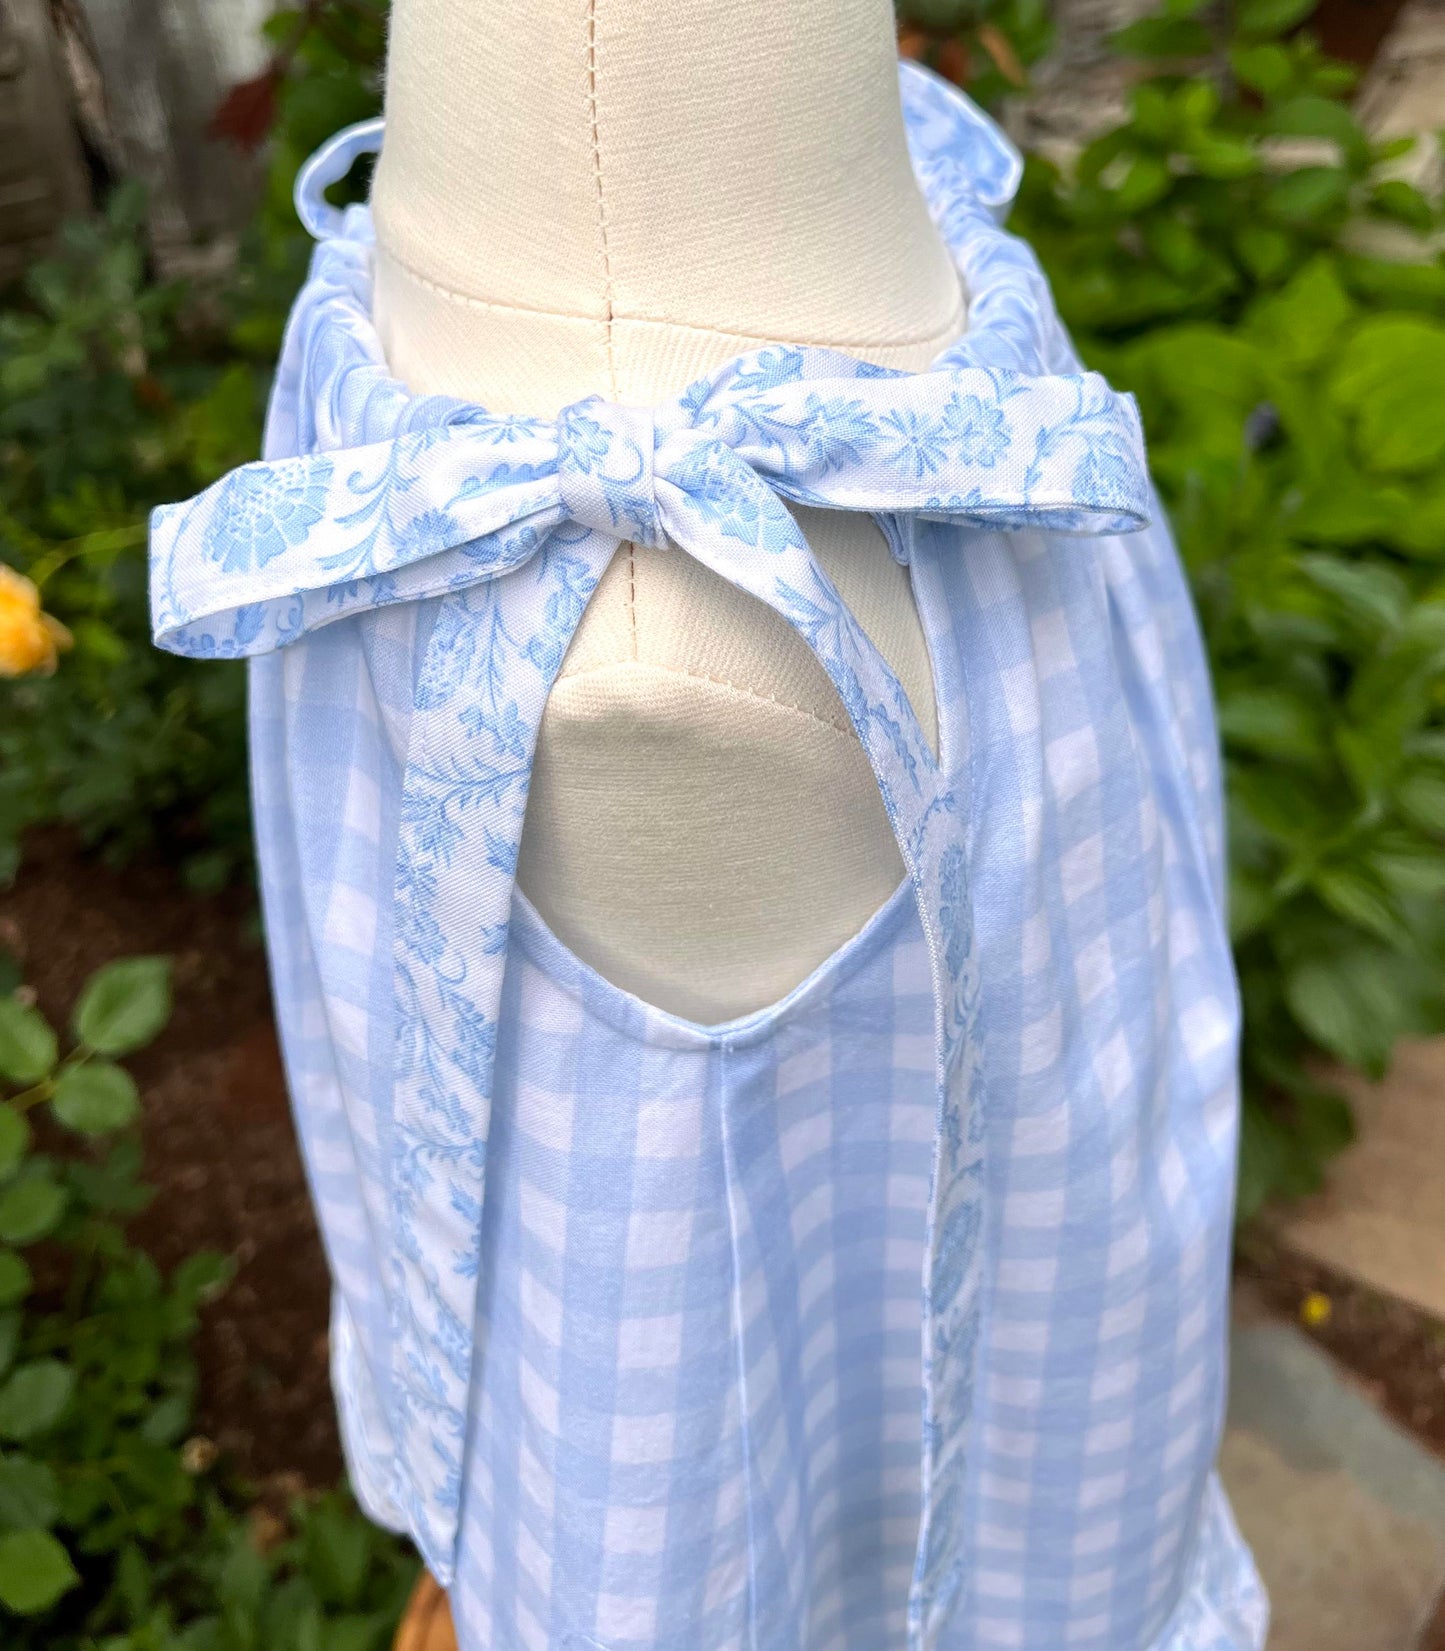 Toddlers size 12-18 month pretty blue plaid and floral summer dress with vintage lace, sleeveless. Cotton. Free Shipping.